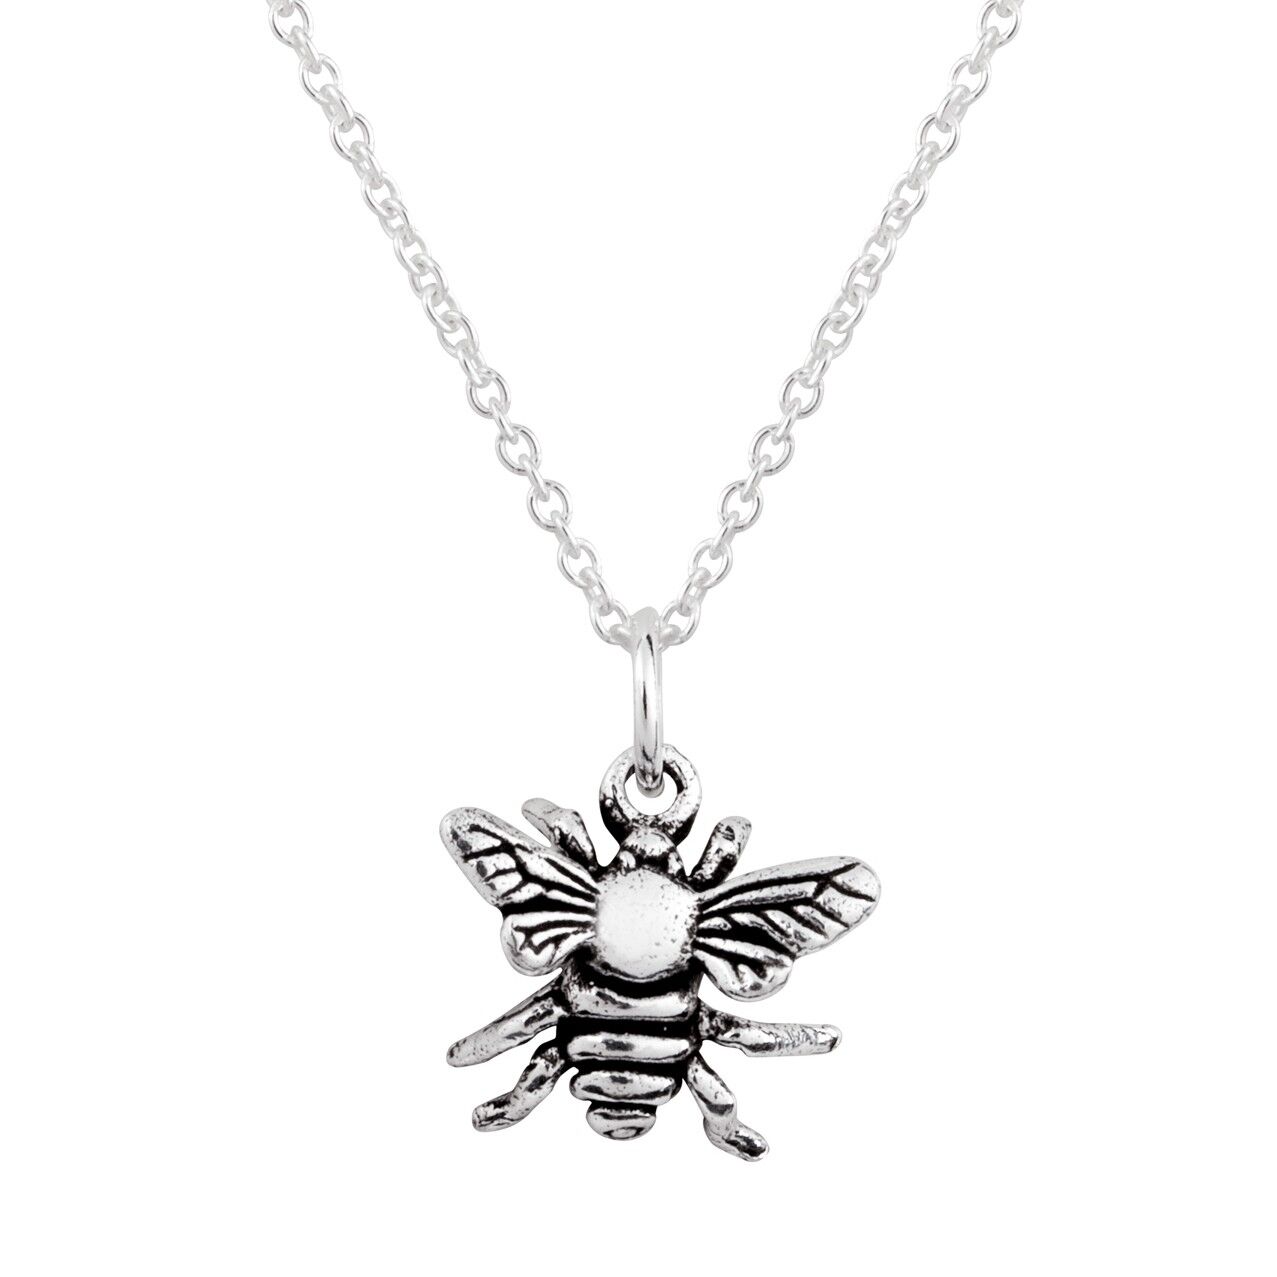 Busy Honey Bee Necklace – Sterling Silver - Inge Riedel Jewellery